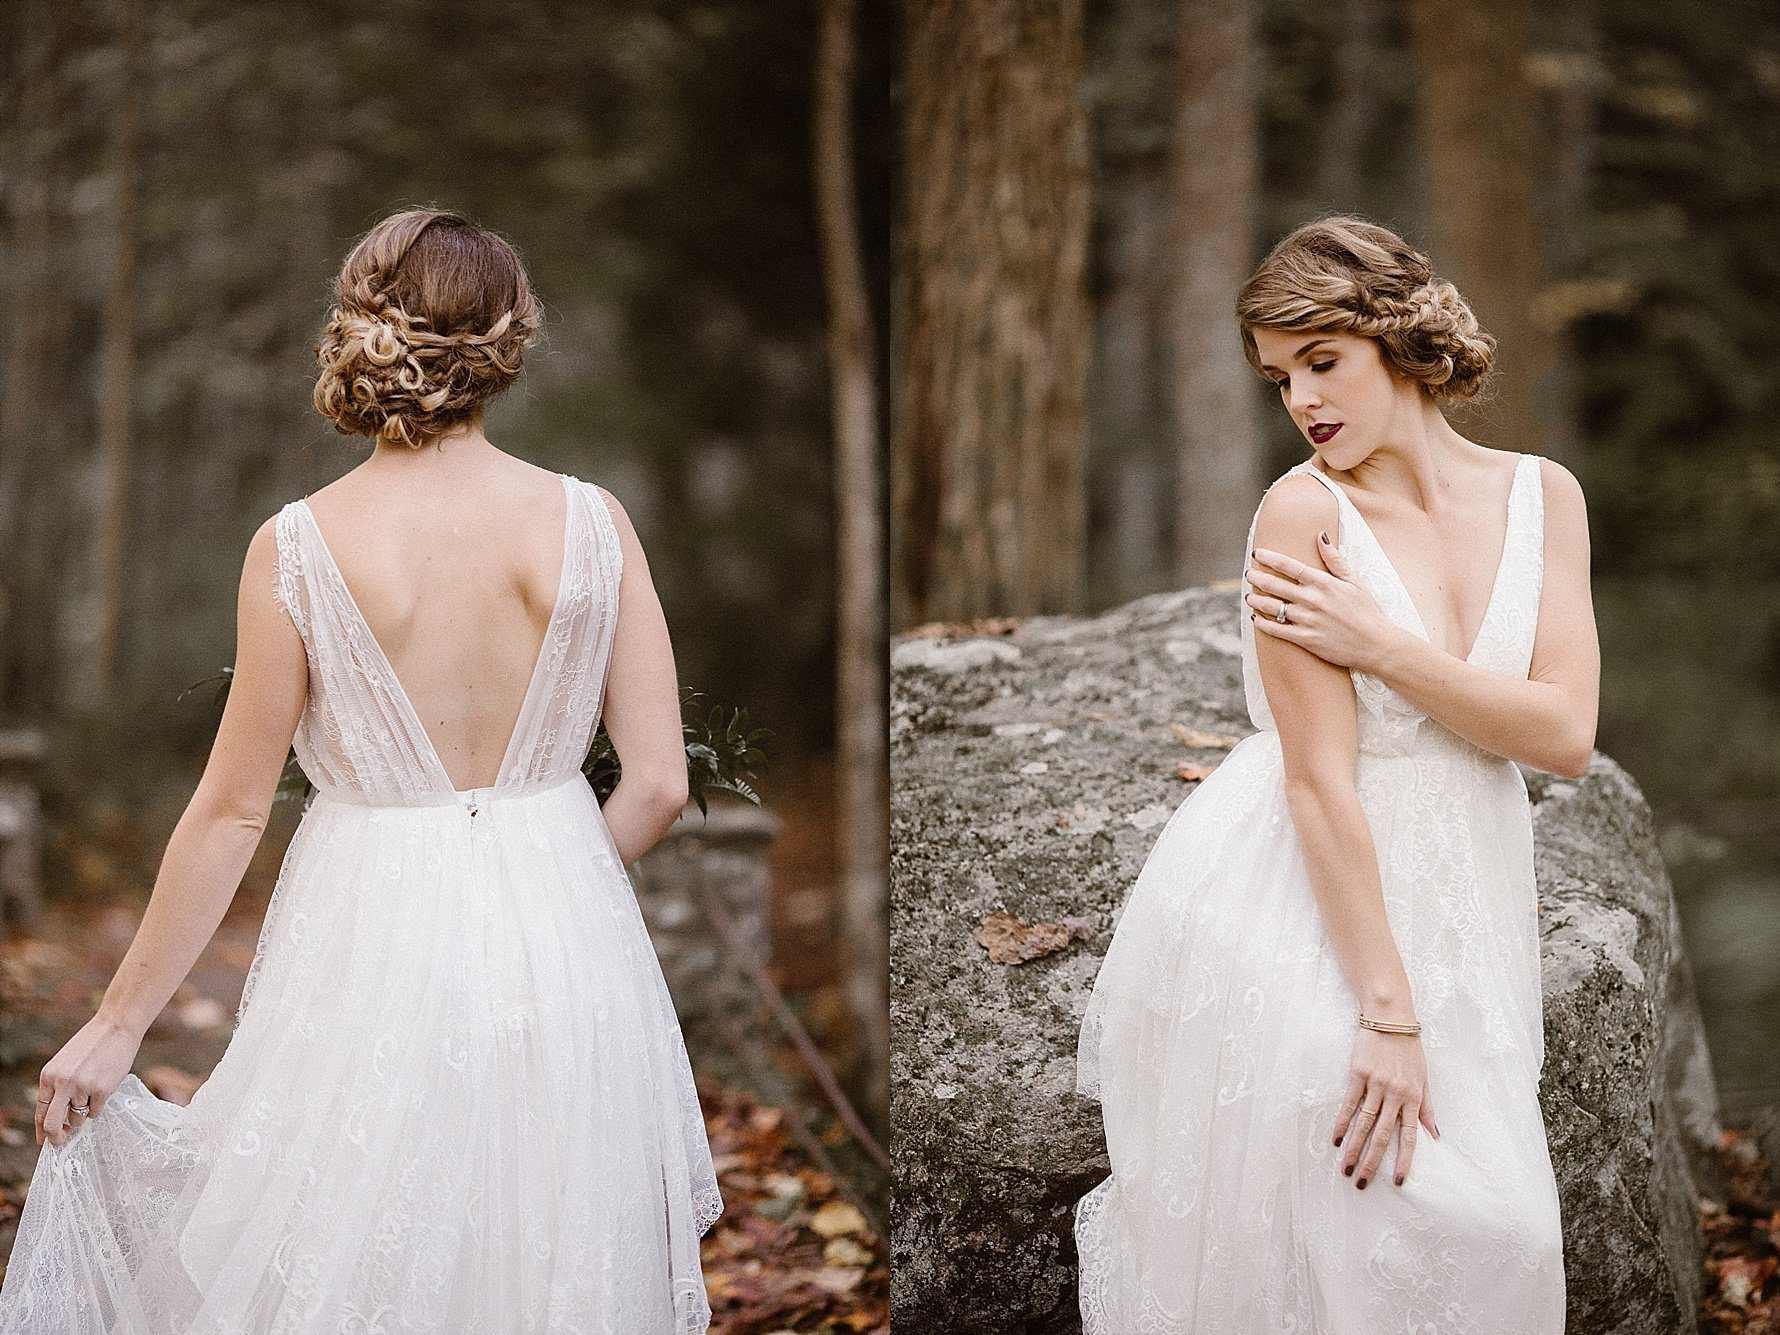 Knoxville Bridal Photos in the Fall | Erin Morrison Photography www.erinmorrisonphotography.com